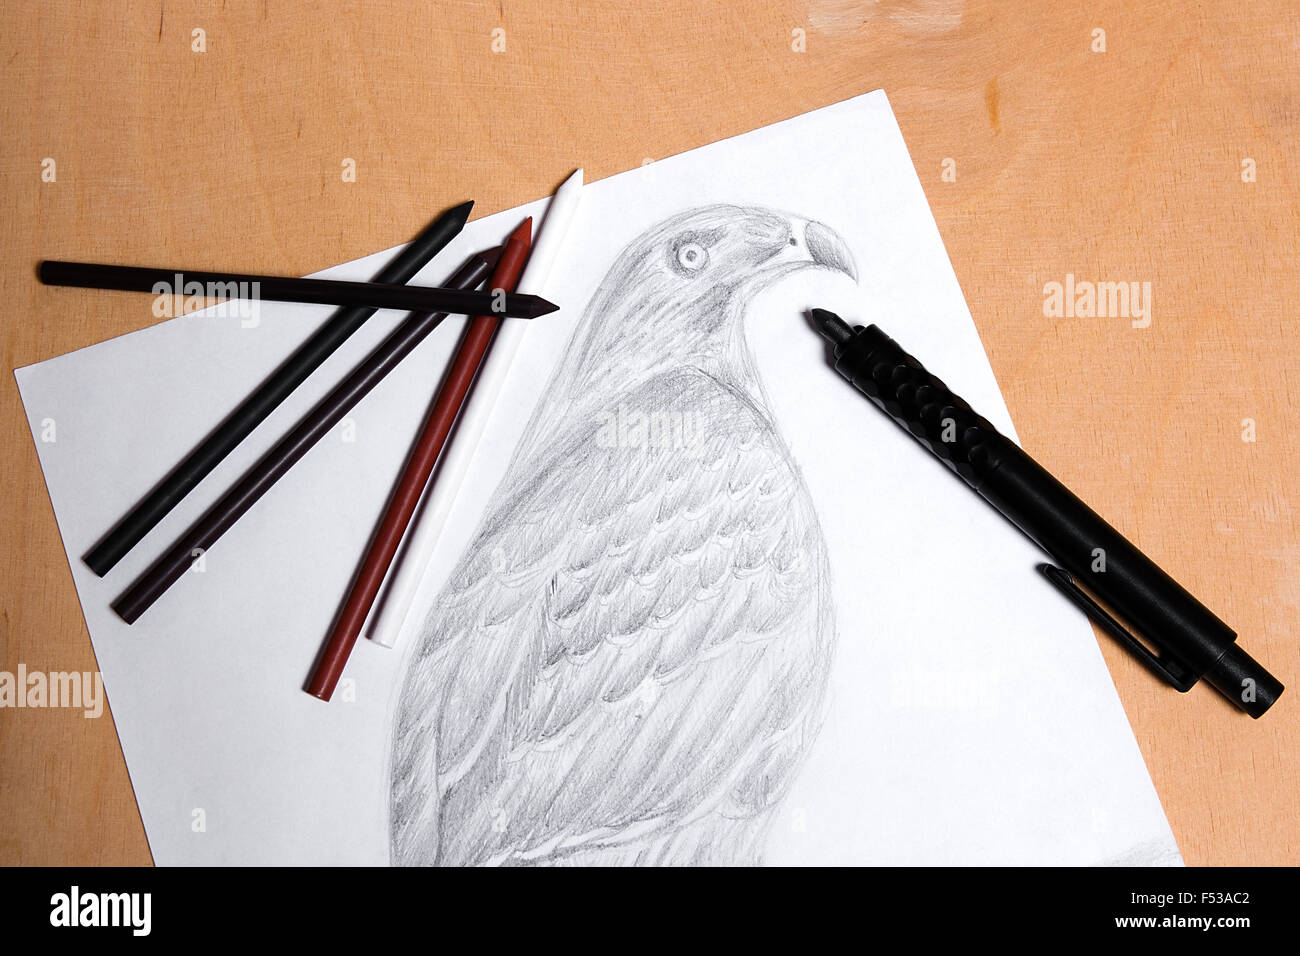 Clutch pencil with drawing hawk on the wooden background. Clutch pencil and different kinds of art materials: sanguine, graphite Stock Photo